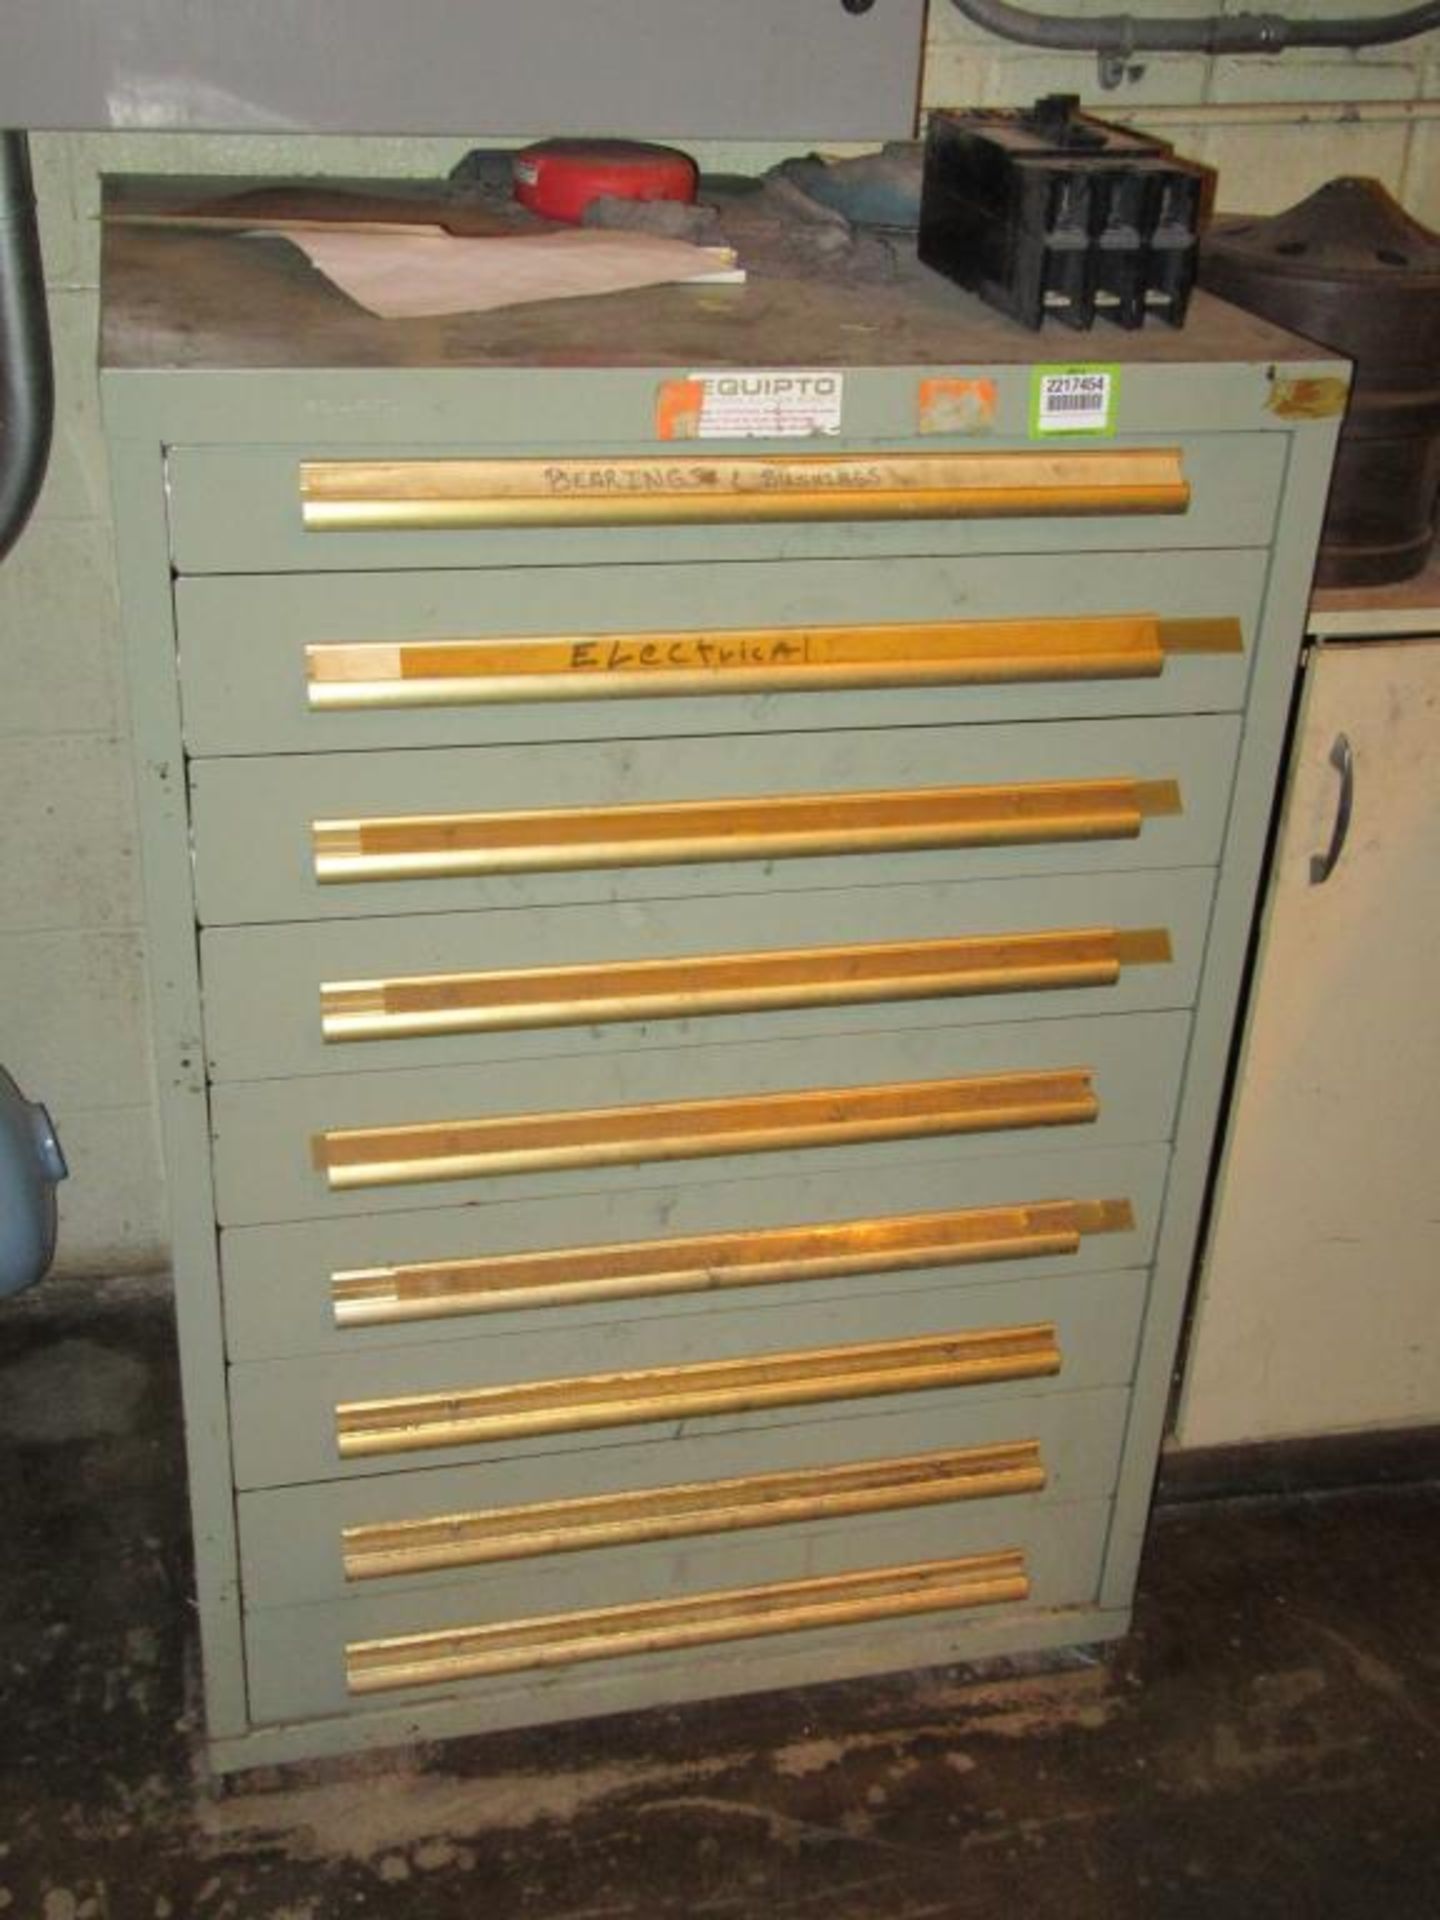 Parts Cabinet; Lot: (2 Items), Consisting of: (1) Equipto 9-Drawer Parts Cabinet 44"H x 30"L x 28"W - Image 2 of 8